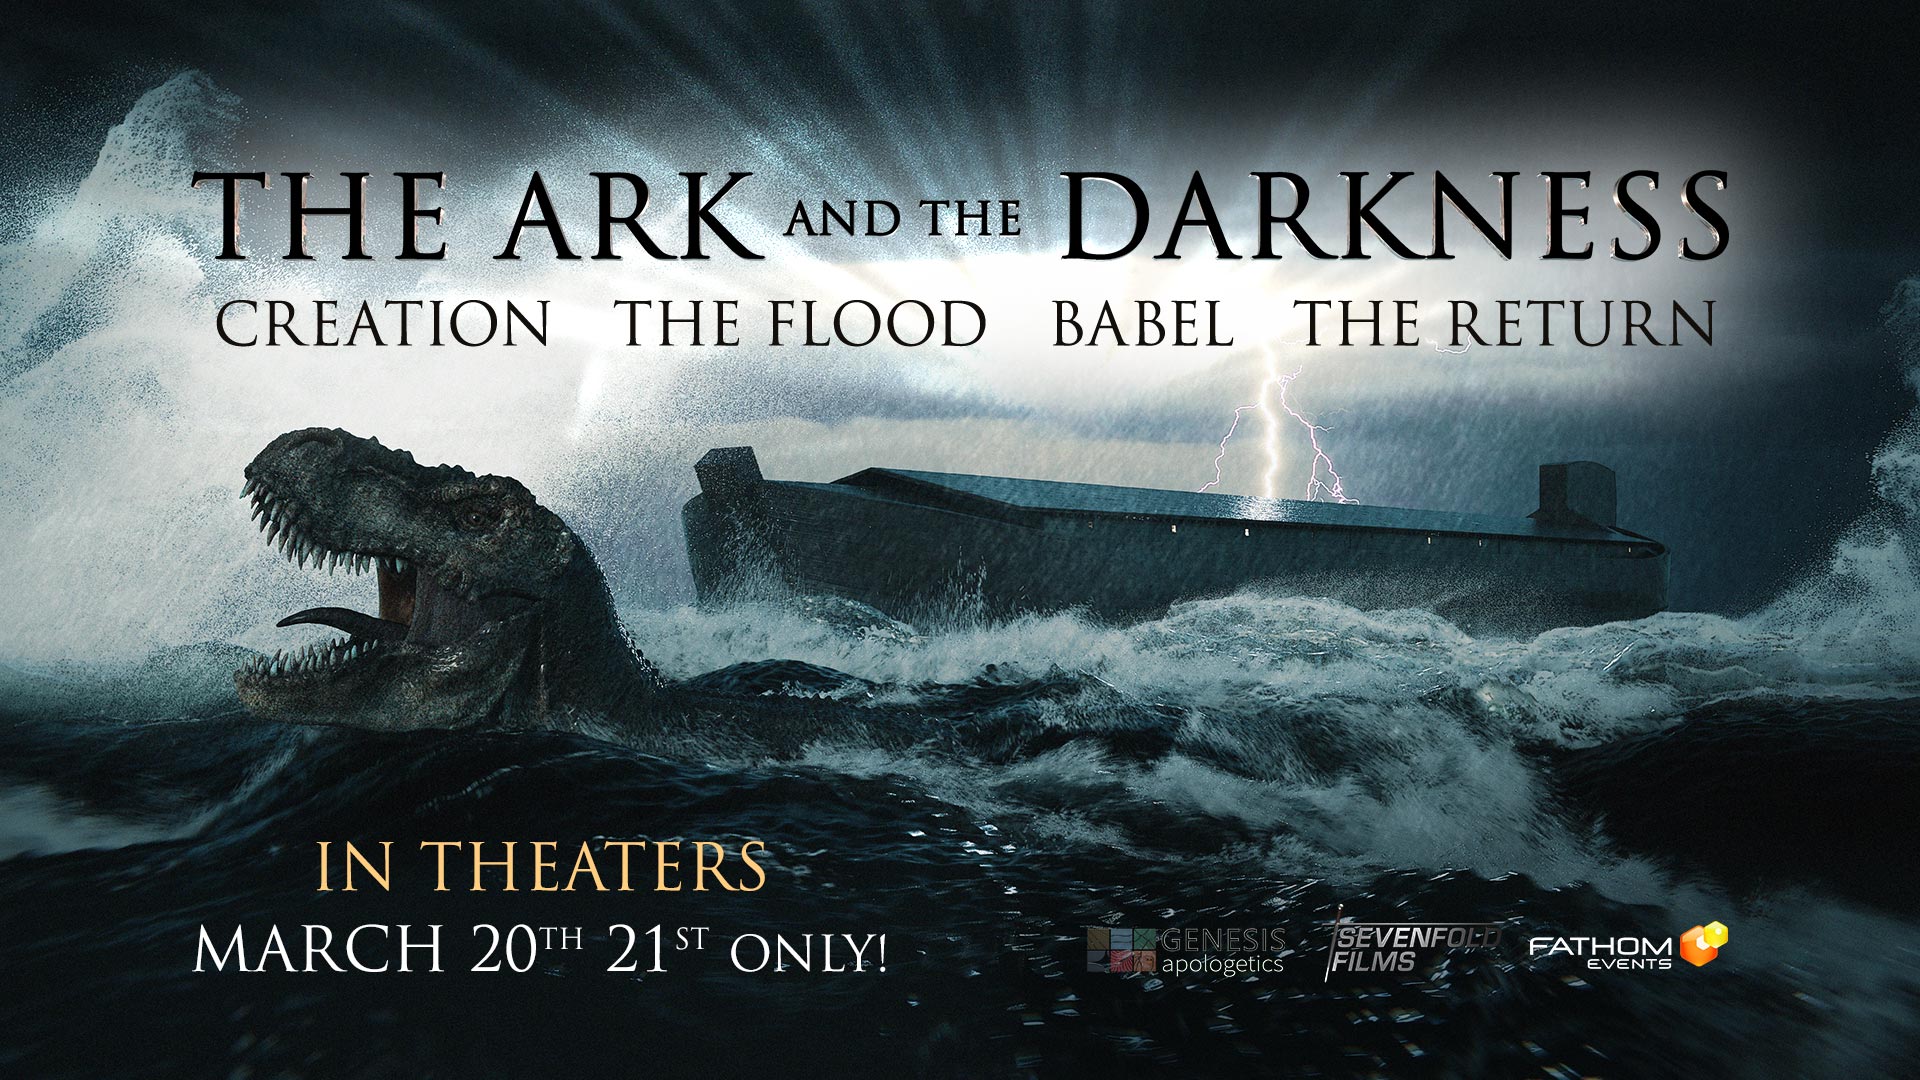 The Ark and the Darkness: Unearthing the Mysteries of Noah's Flood